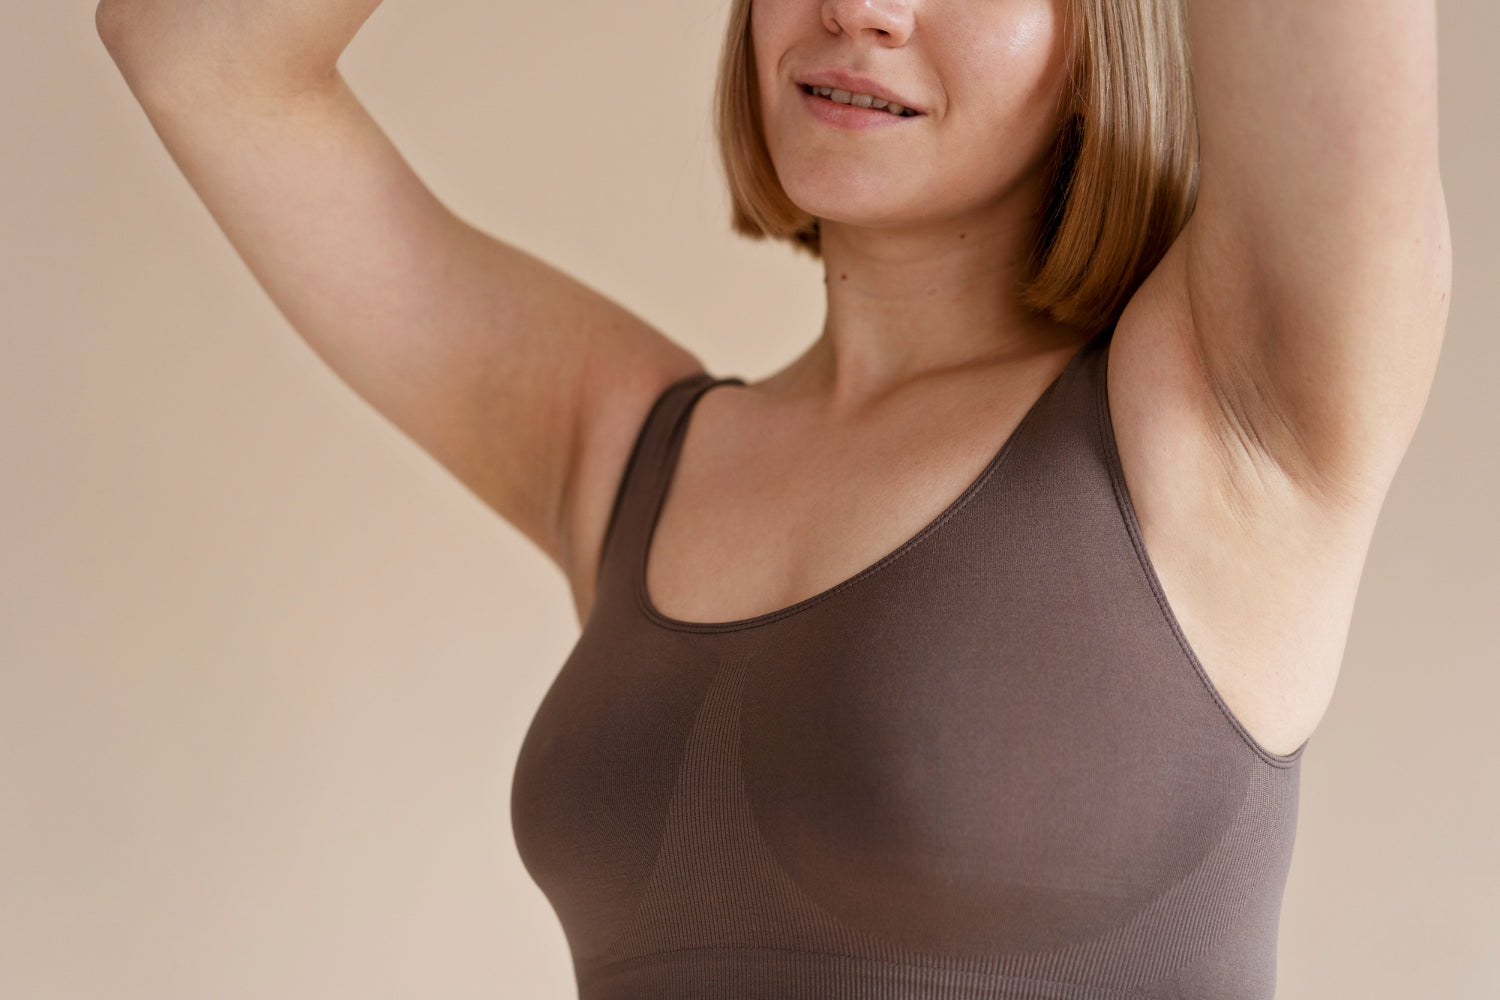 5 Struggles Only Women with Saggy Breasts Understand